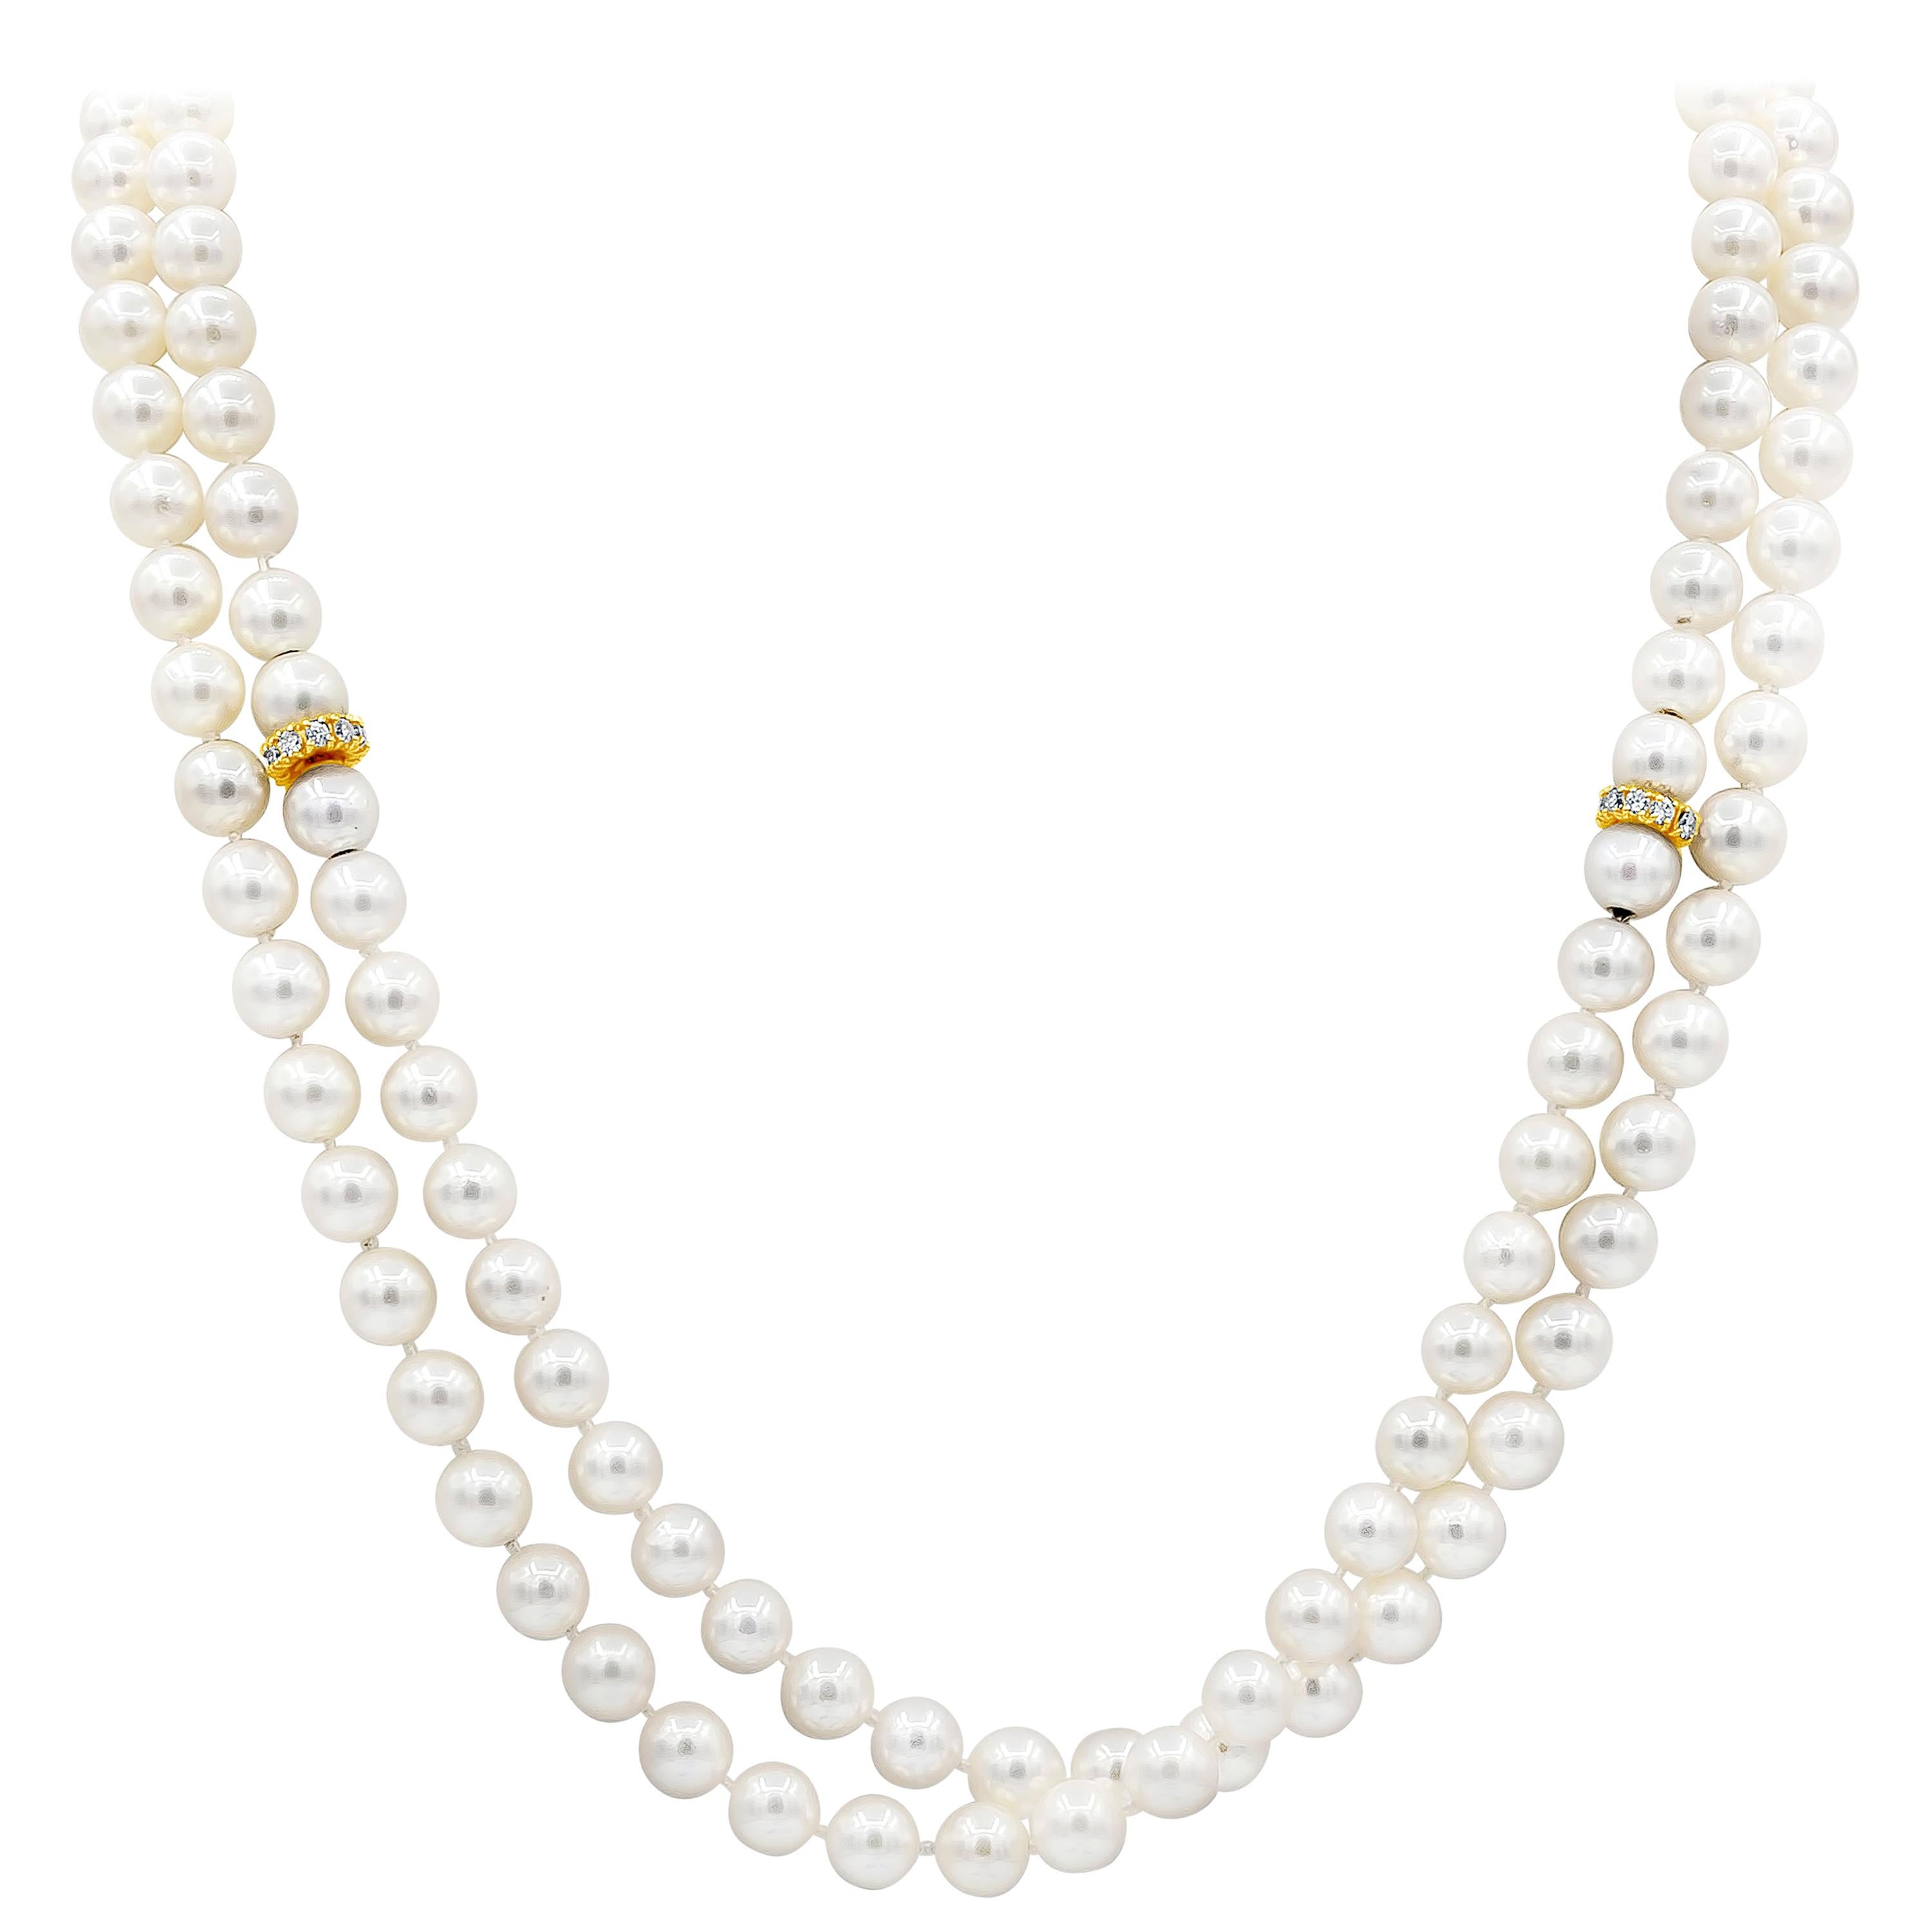 Roman Malakov 1 Carats Total Diamond & Pearl Collapsible Multi-Strand Necklace For Sale